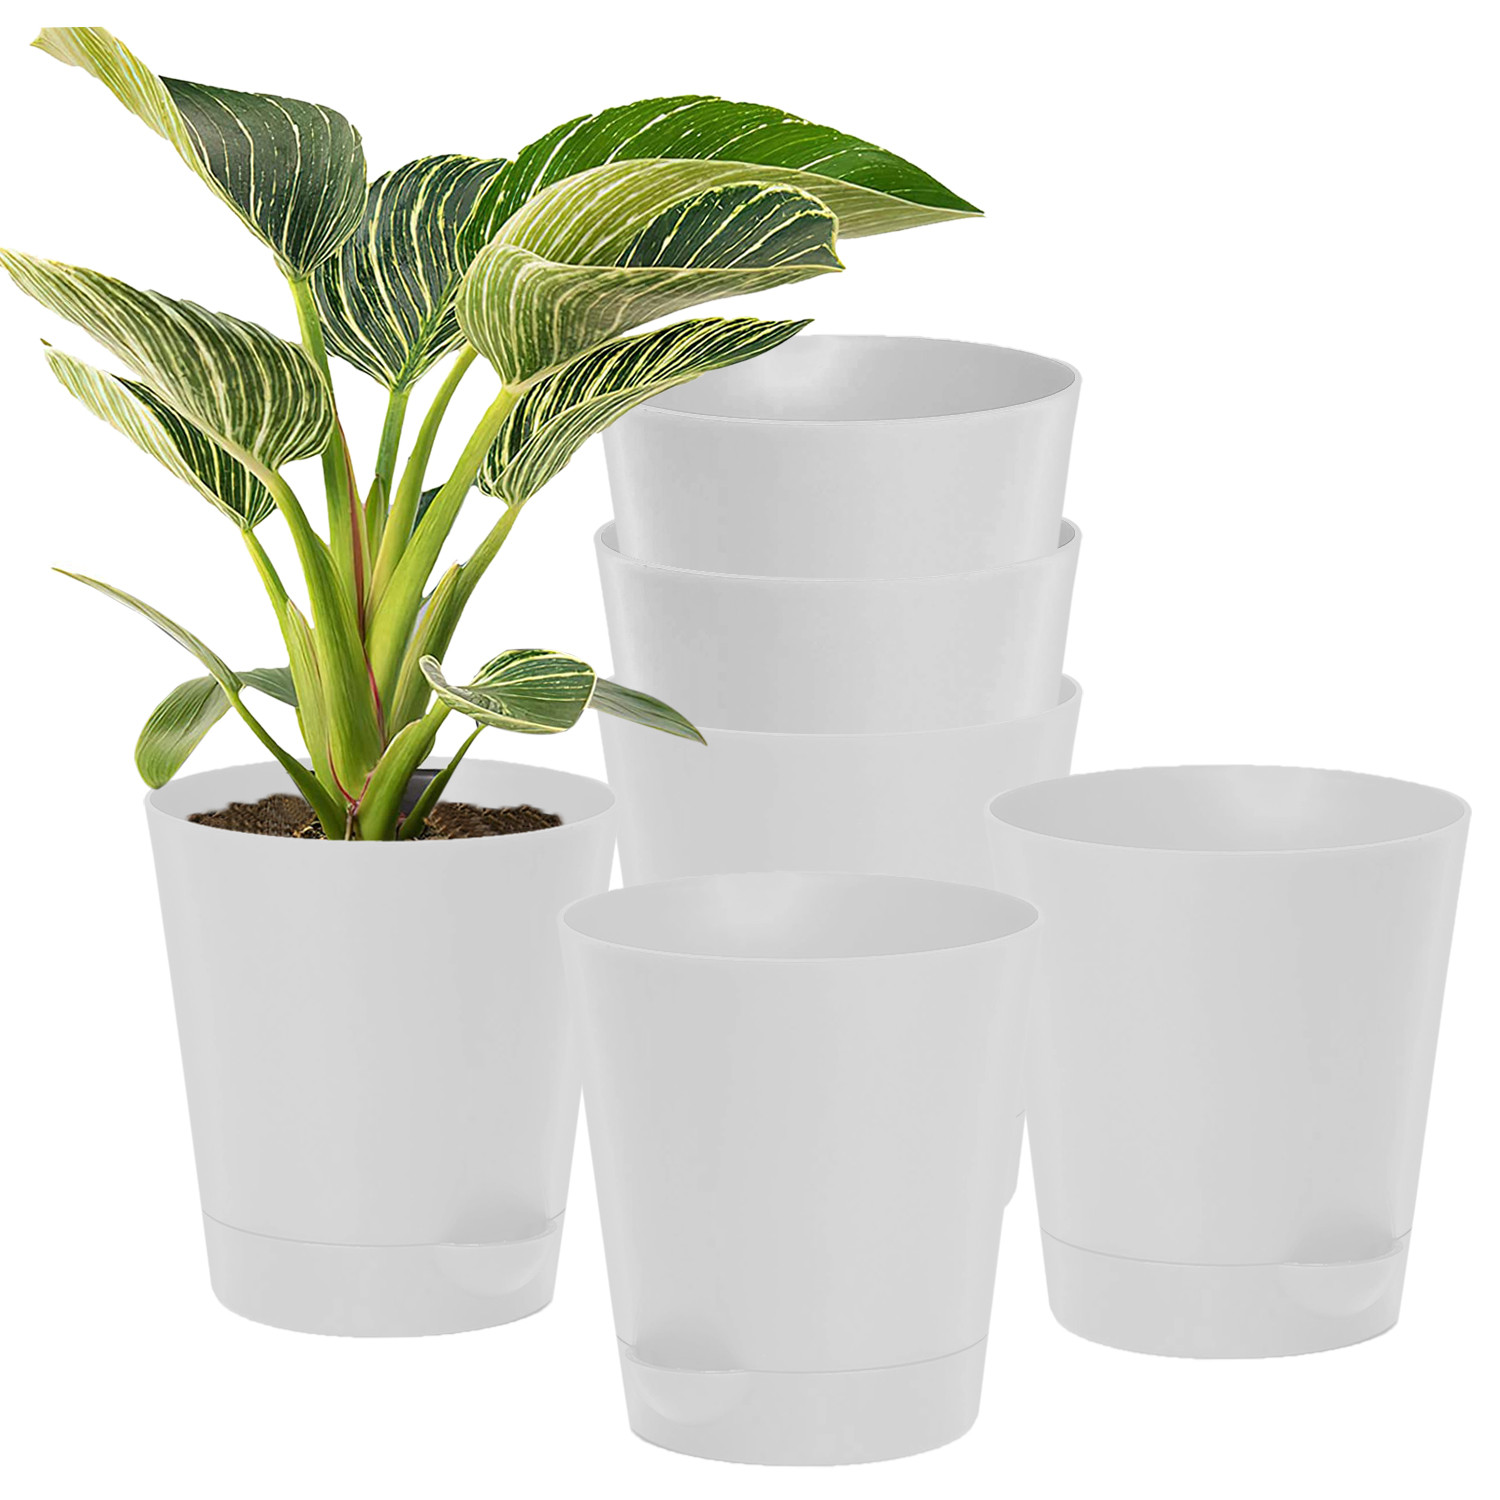 Kuber Industries Plastic Titan Pot|Garden Container For Plants & Flowers|Self-Watering Pot With Drainage Holes,6 Inch (White)